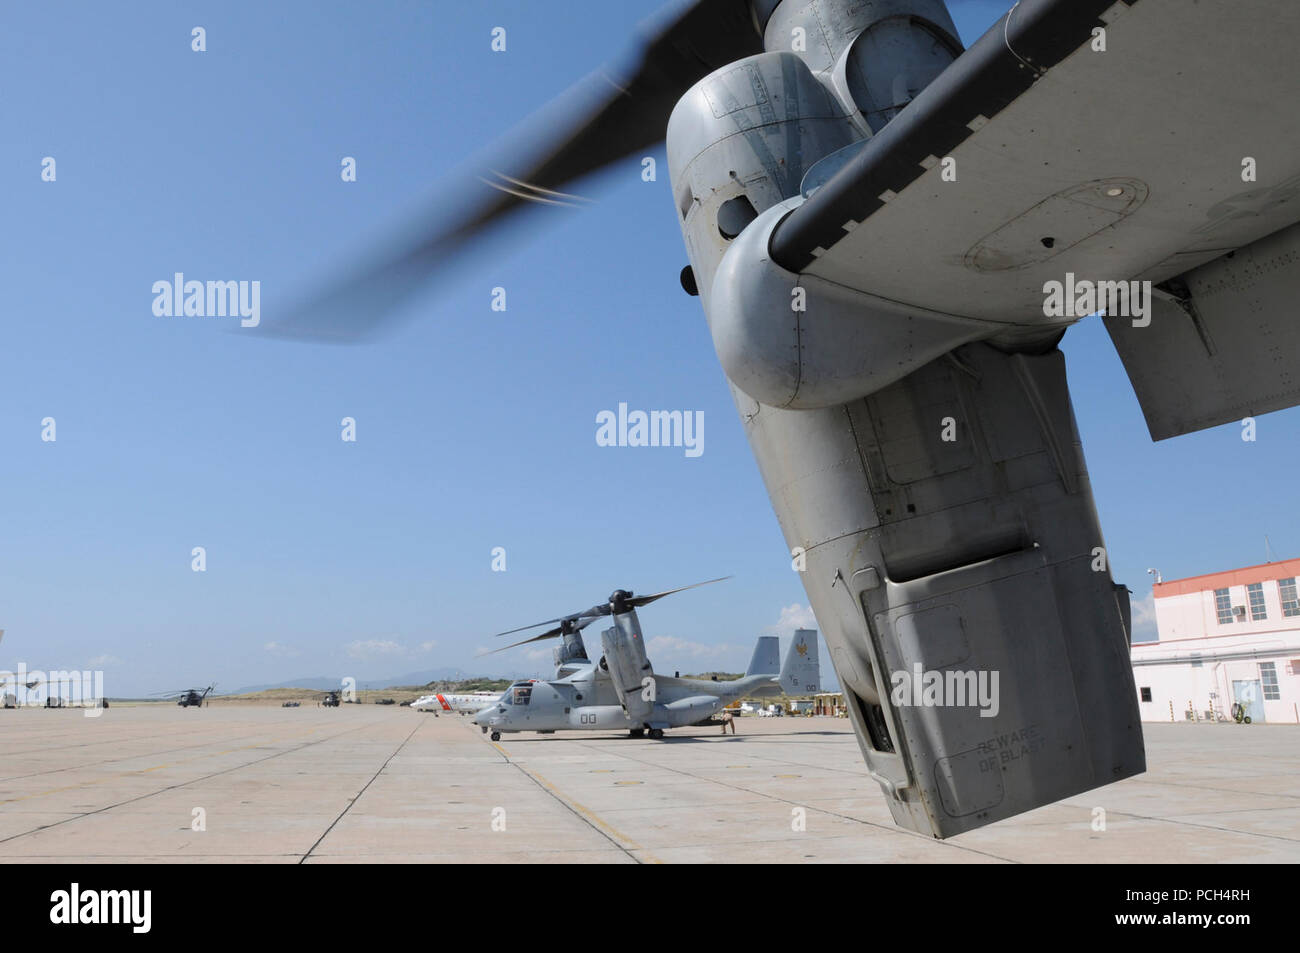 A MV-22 Osprey, from the Marine Medium Tiltrotor Squadron 162, waits for supplies at U.S. Naval Station Guantanamo Bay, Jan. 24. The aircraft, scheduled to fly a mission to USS Bataan, is here in support of Operation Unified Response to provide humanitarian assistance to victims of the Jan. 12 earthquake in Haiti. Stock Photo